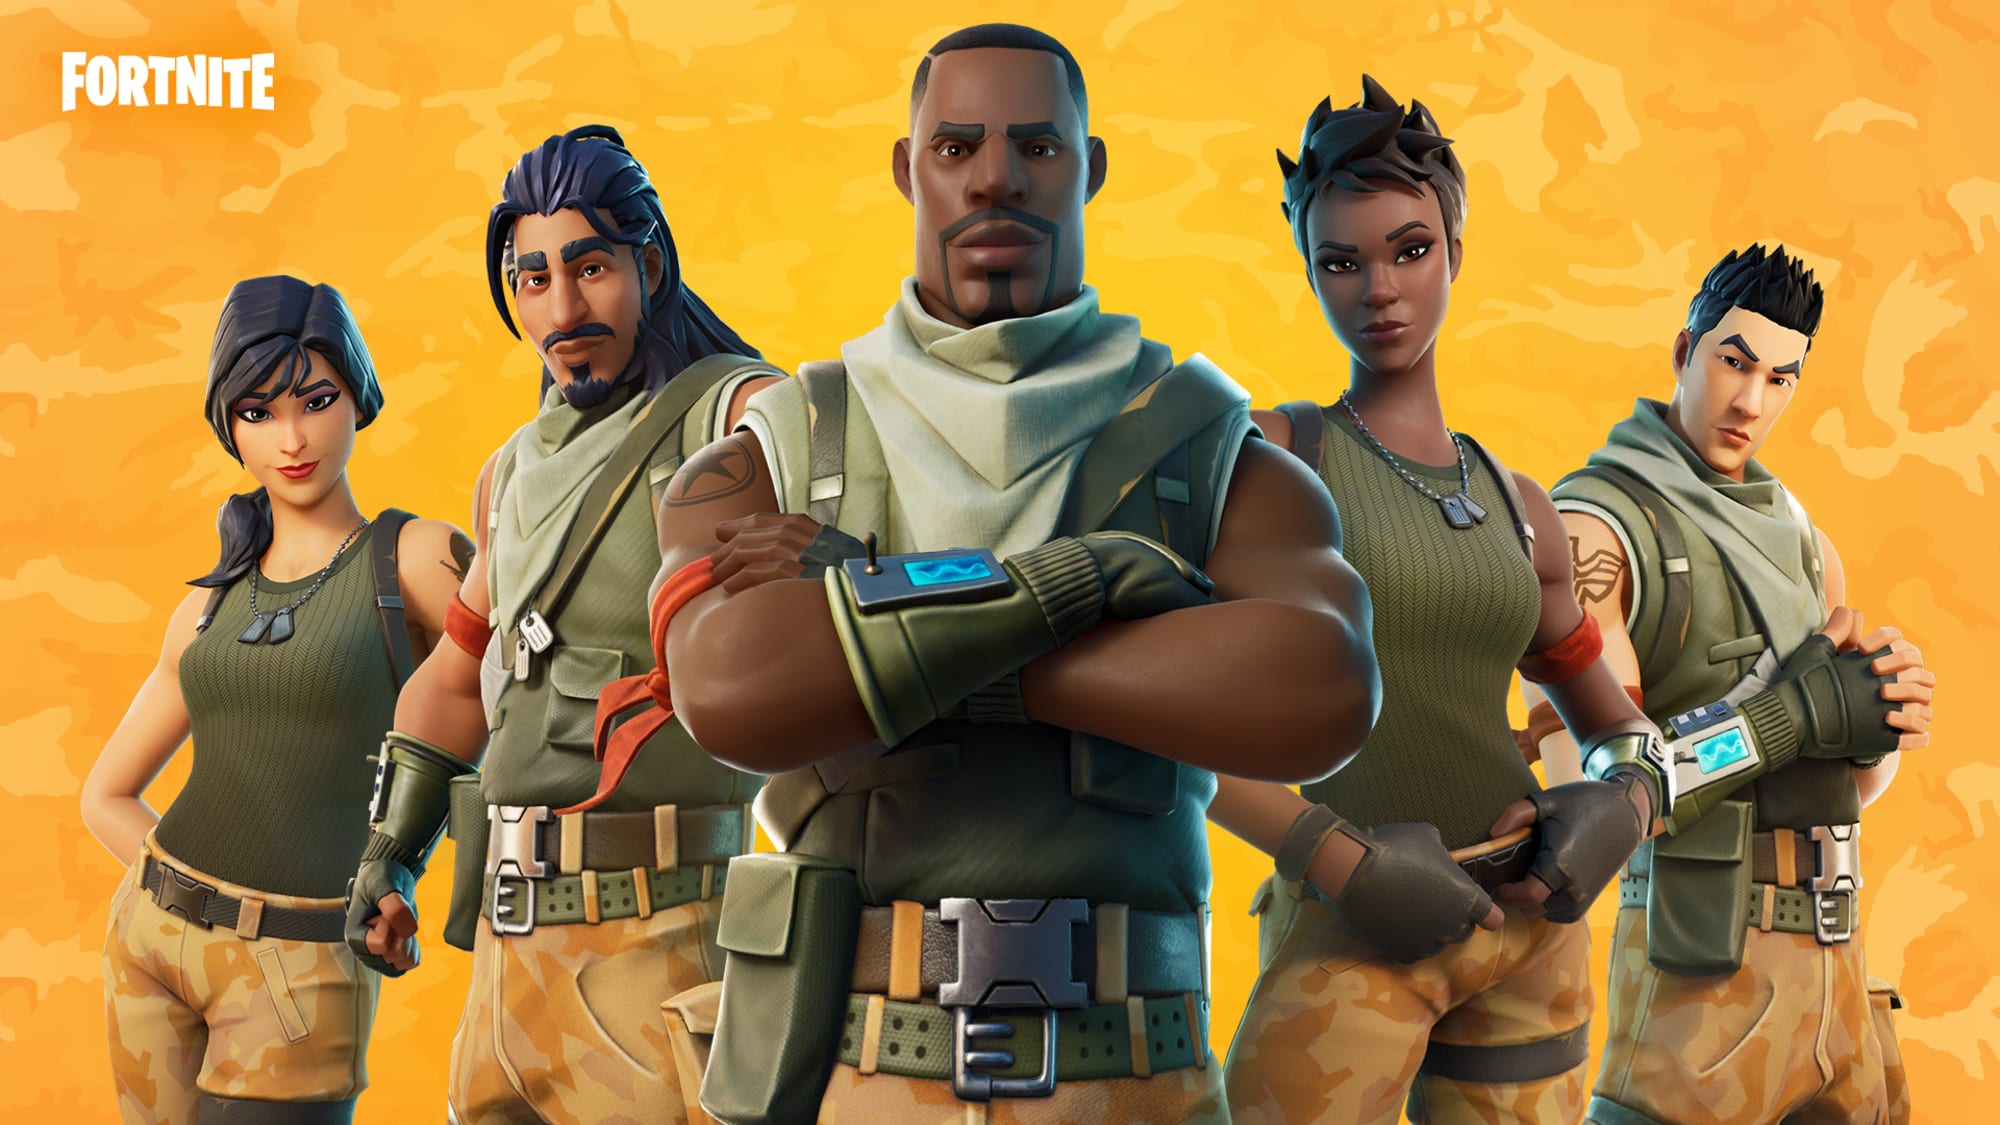 Fortnite Split Screen is back: Here's how to Split Screen on PS4 and Xbox  One, Gaming, Entertainment